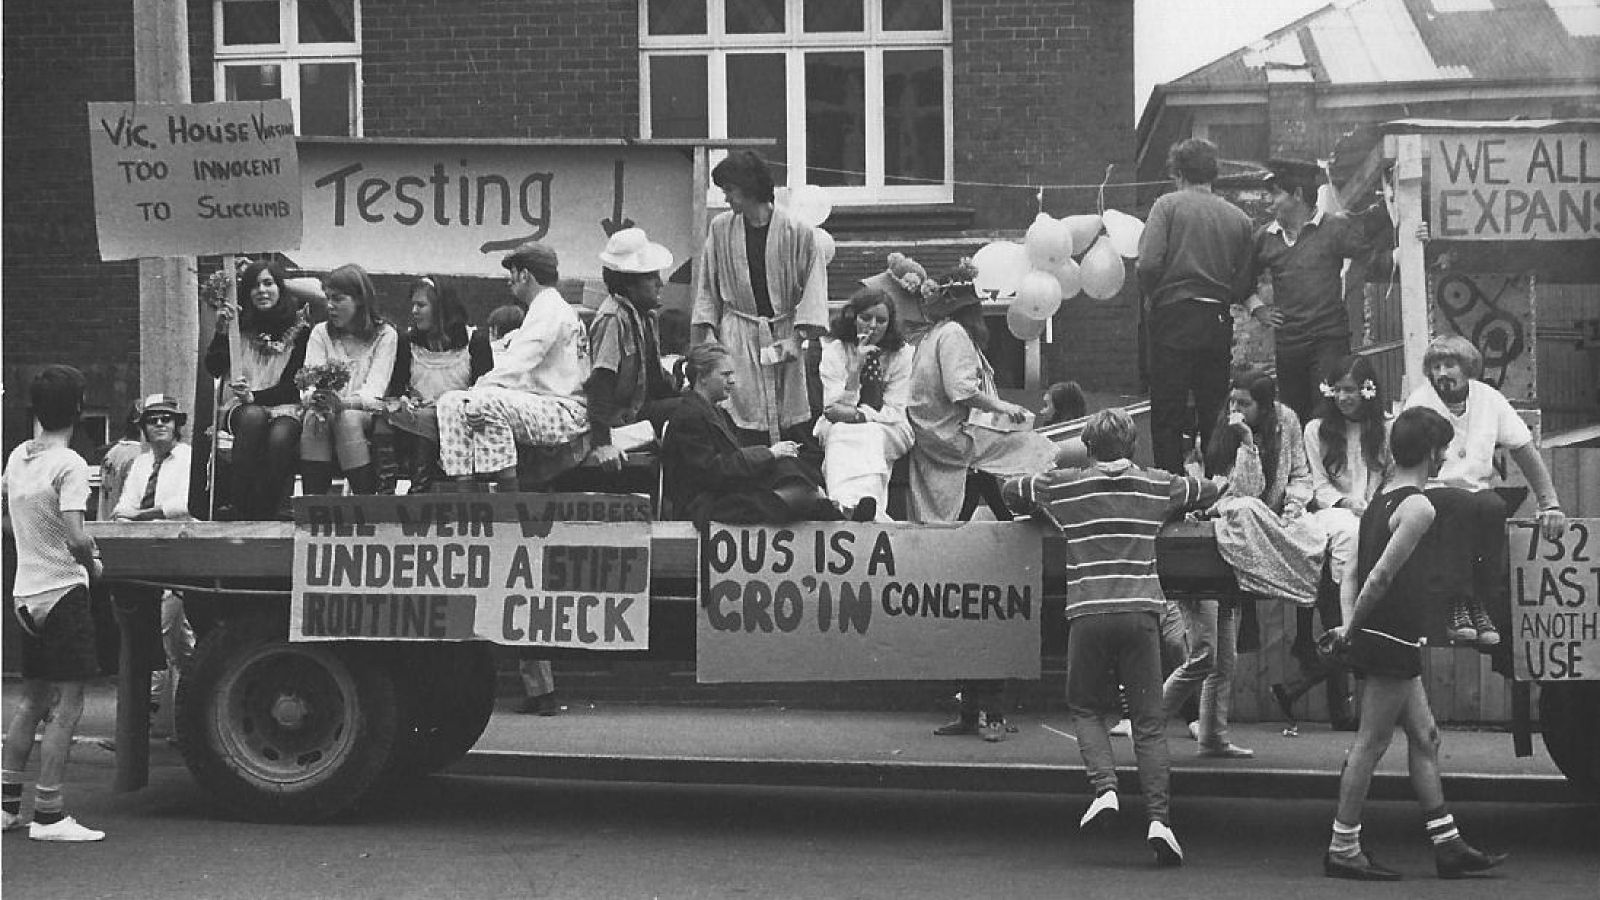 Students with signs on truck